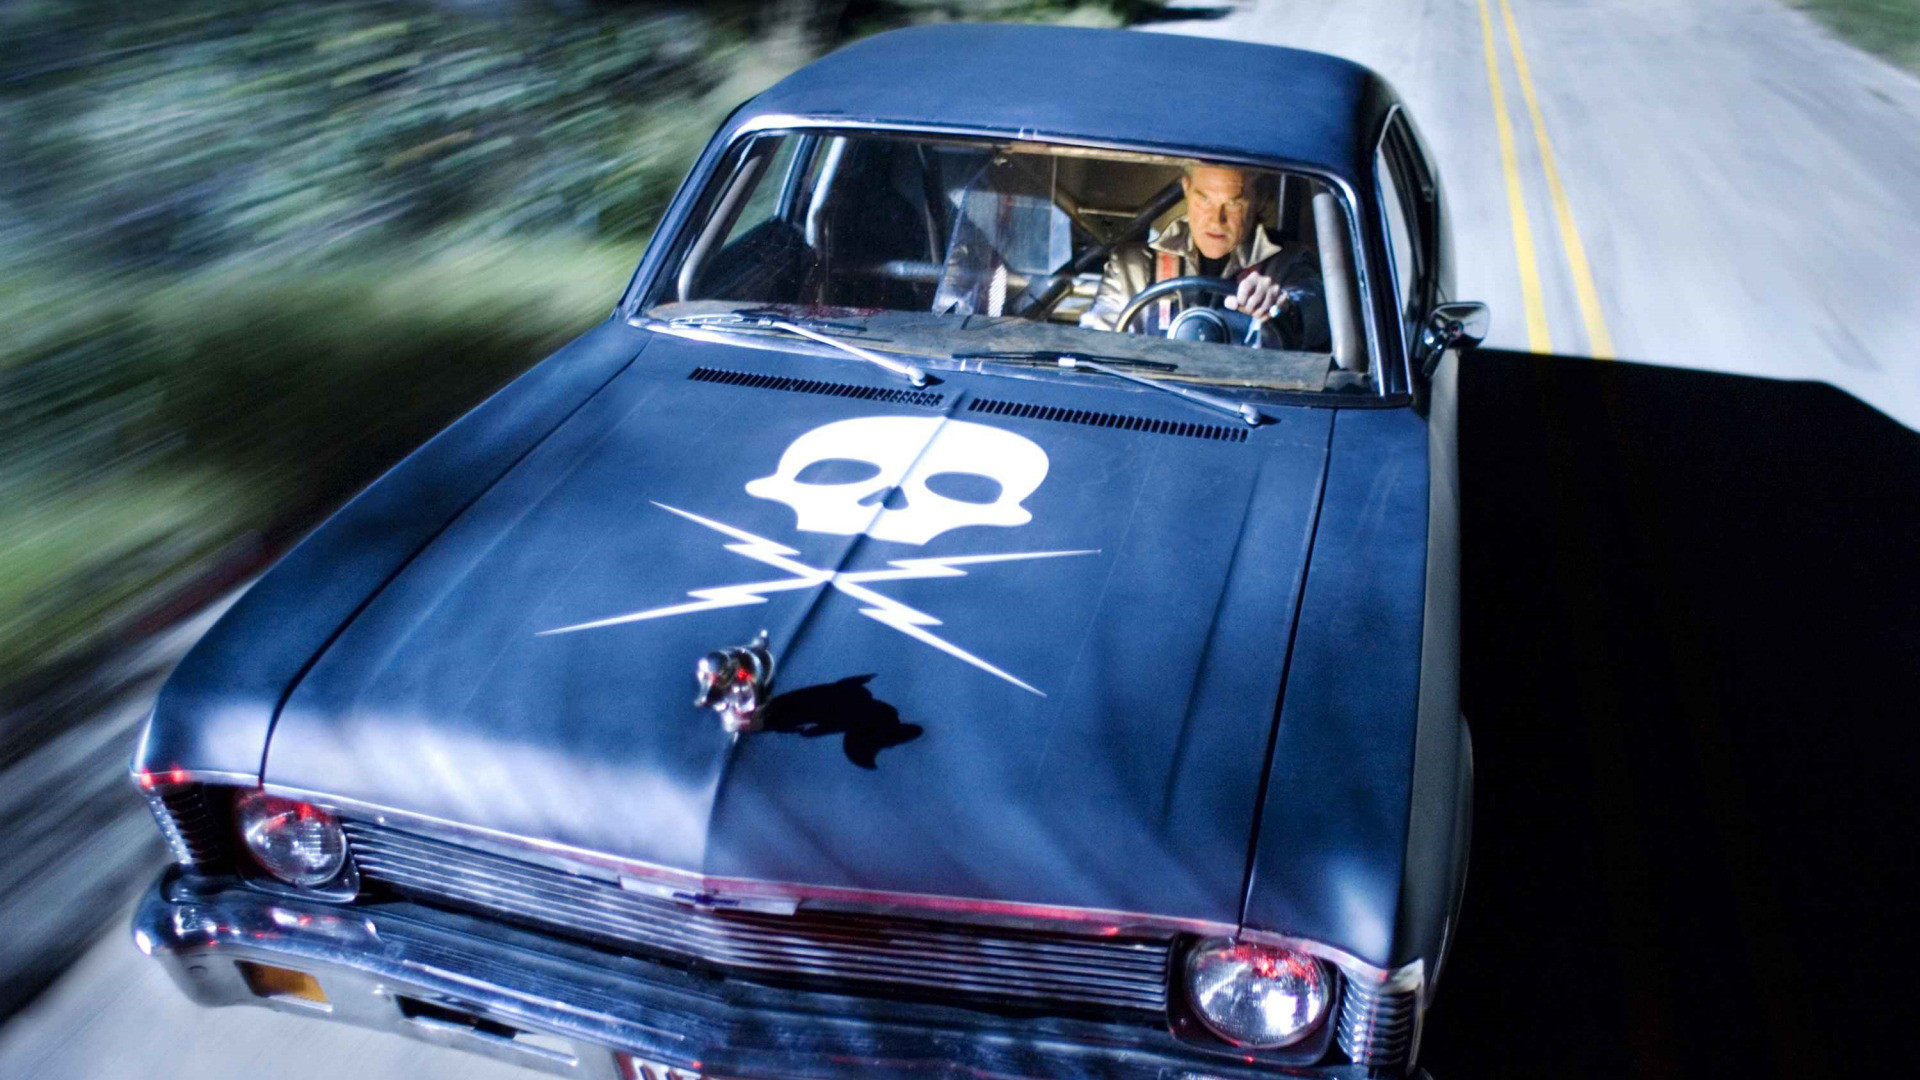 Death Proof Wallpapers